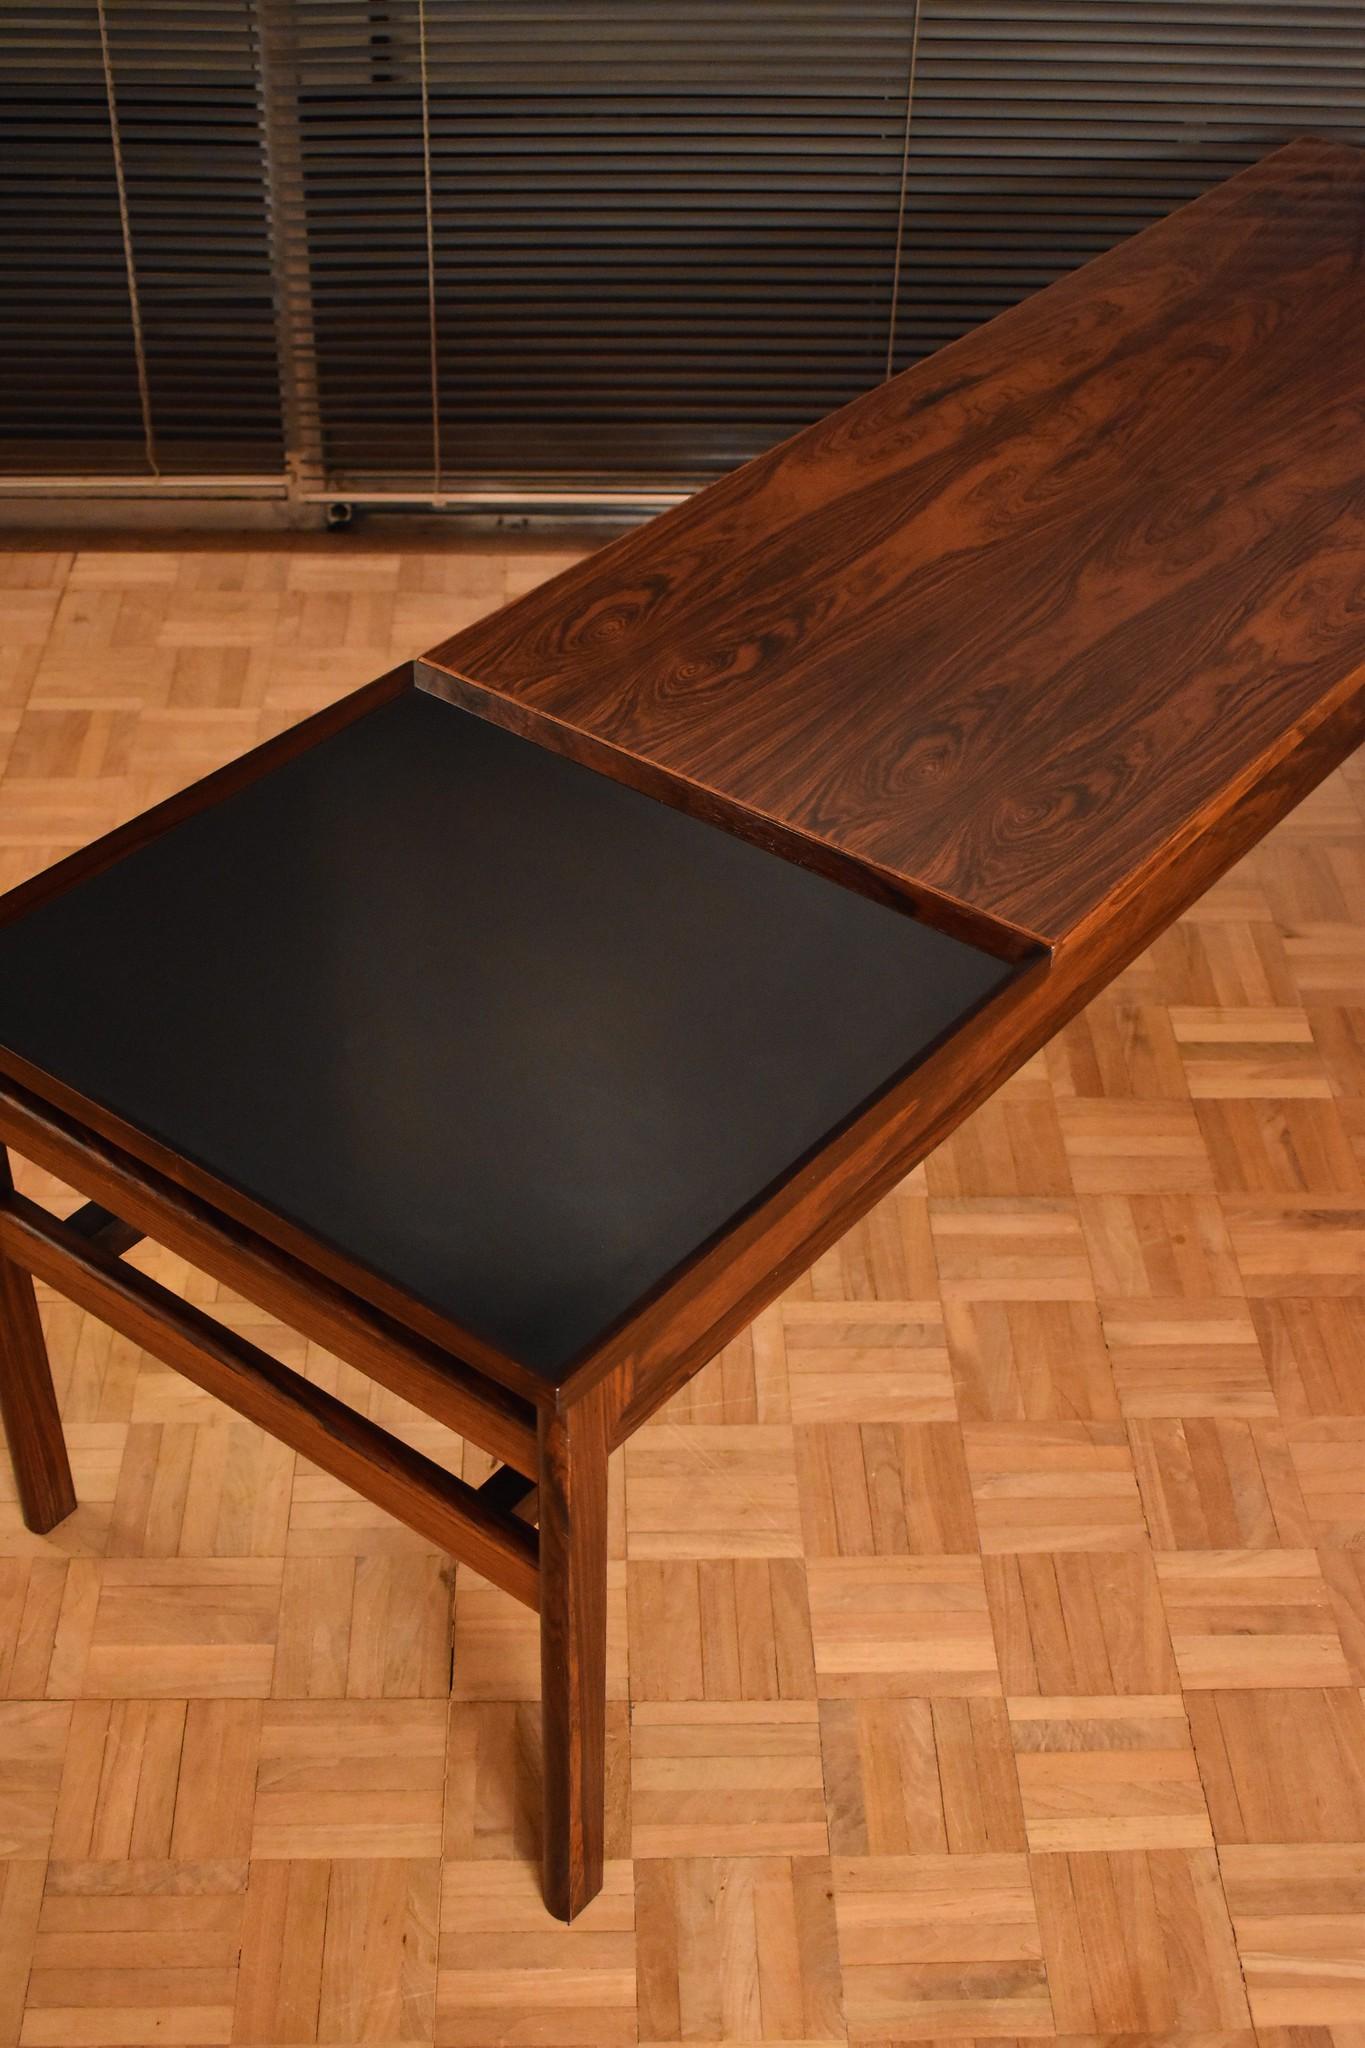 An incredibly rare design from Hans Olsen.

A very impressive coffee table produced in lush Brazilian rosewood. The design features a sliding surface which allows a black melamine tray stowed underneath to be placed on top. This hard wearing